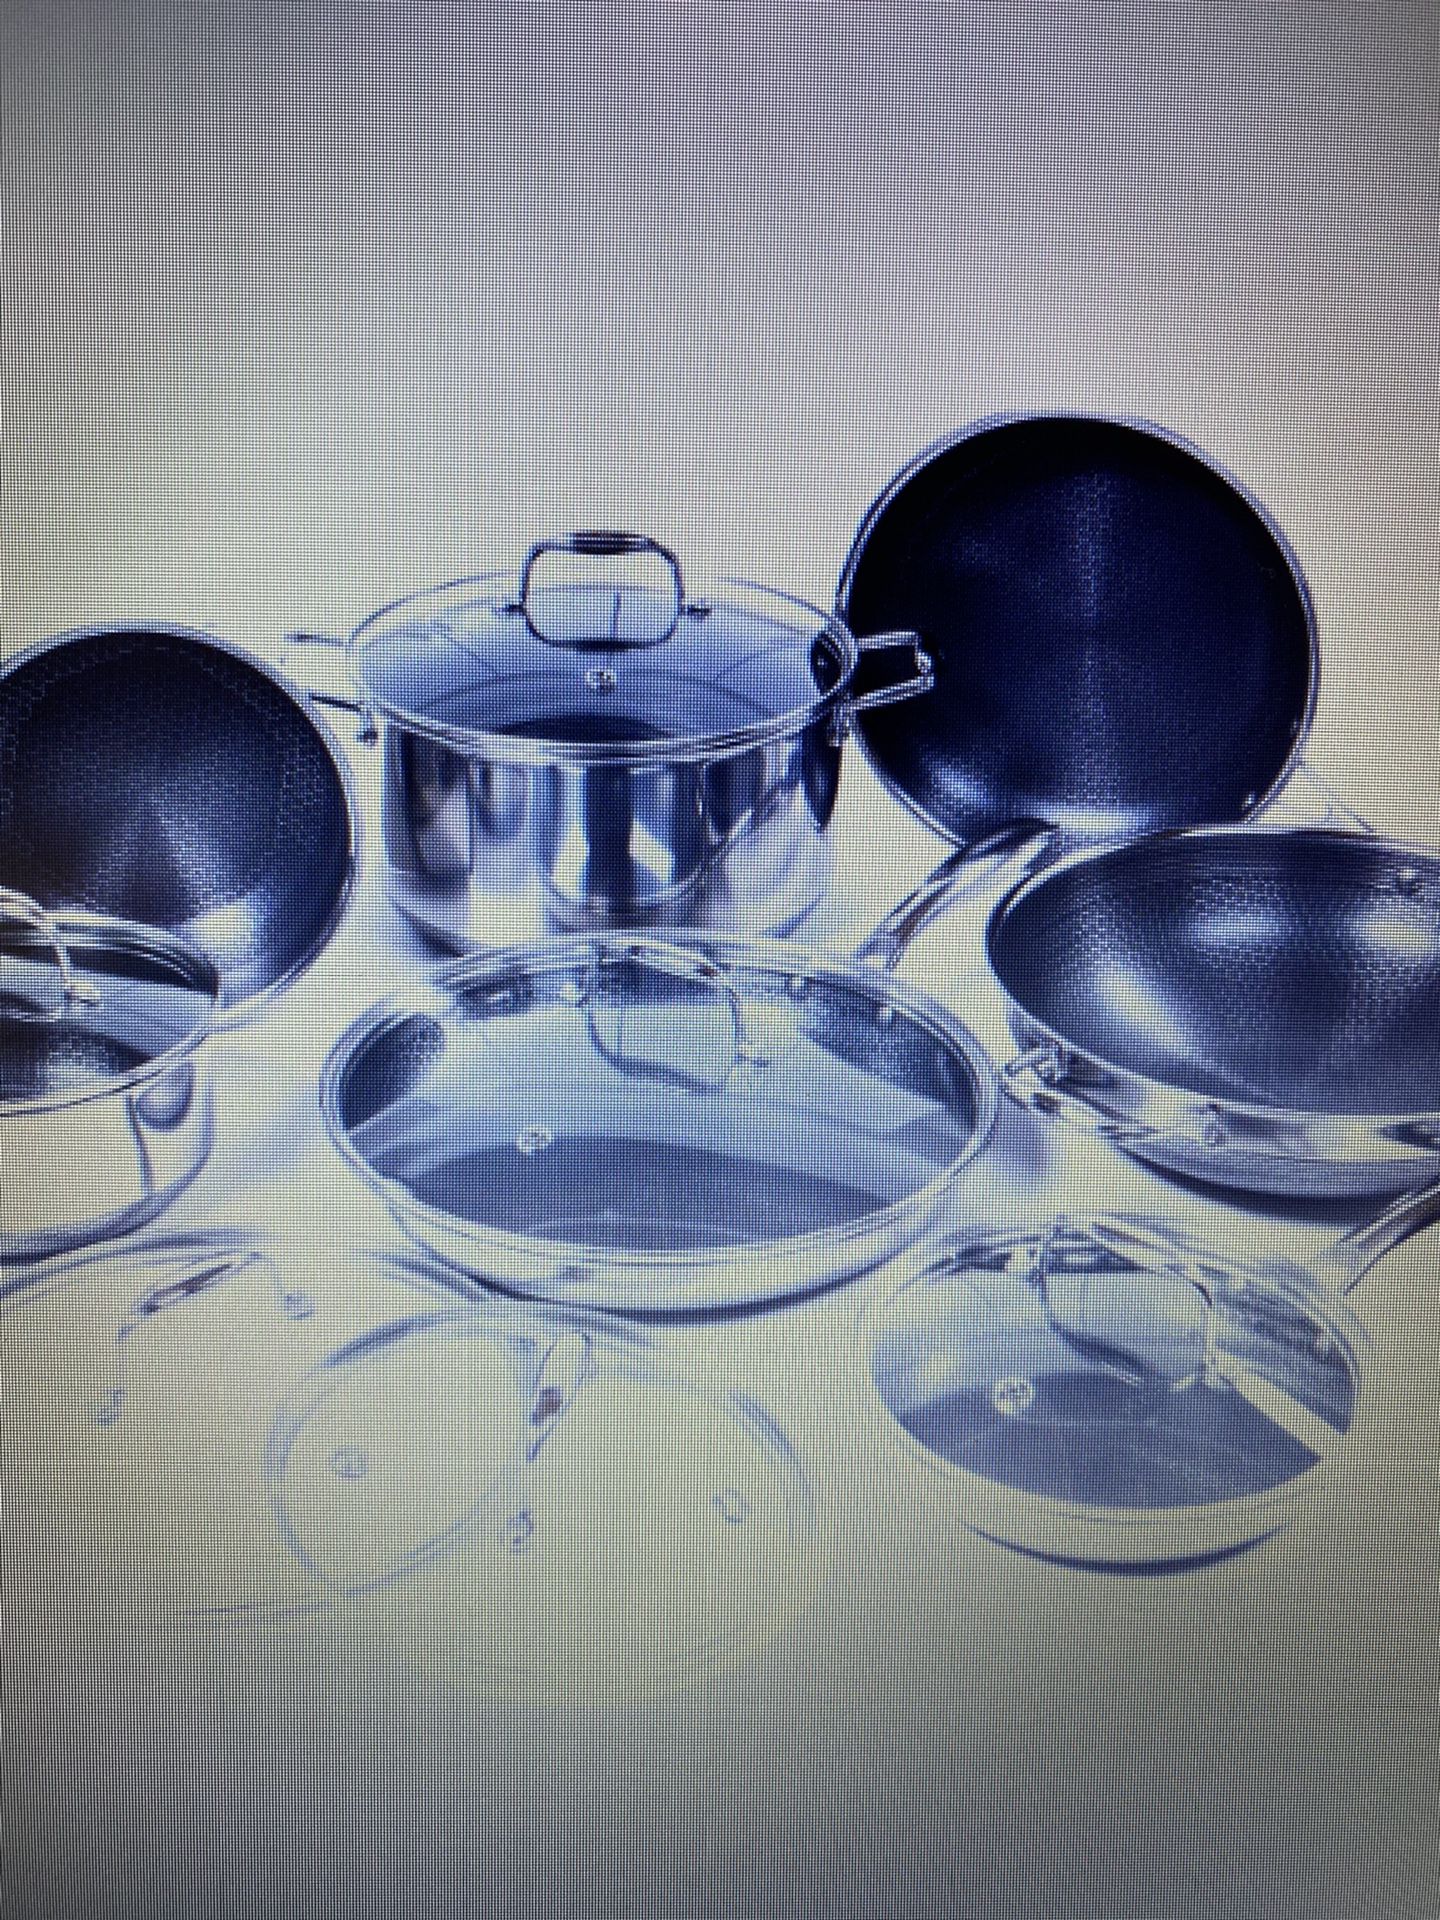 8 Piece hexclad Hybrid Cookware Set for Sale in Federal Way, WA - OfferUp